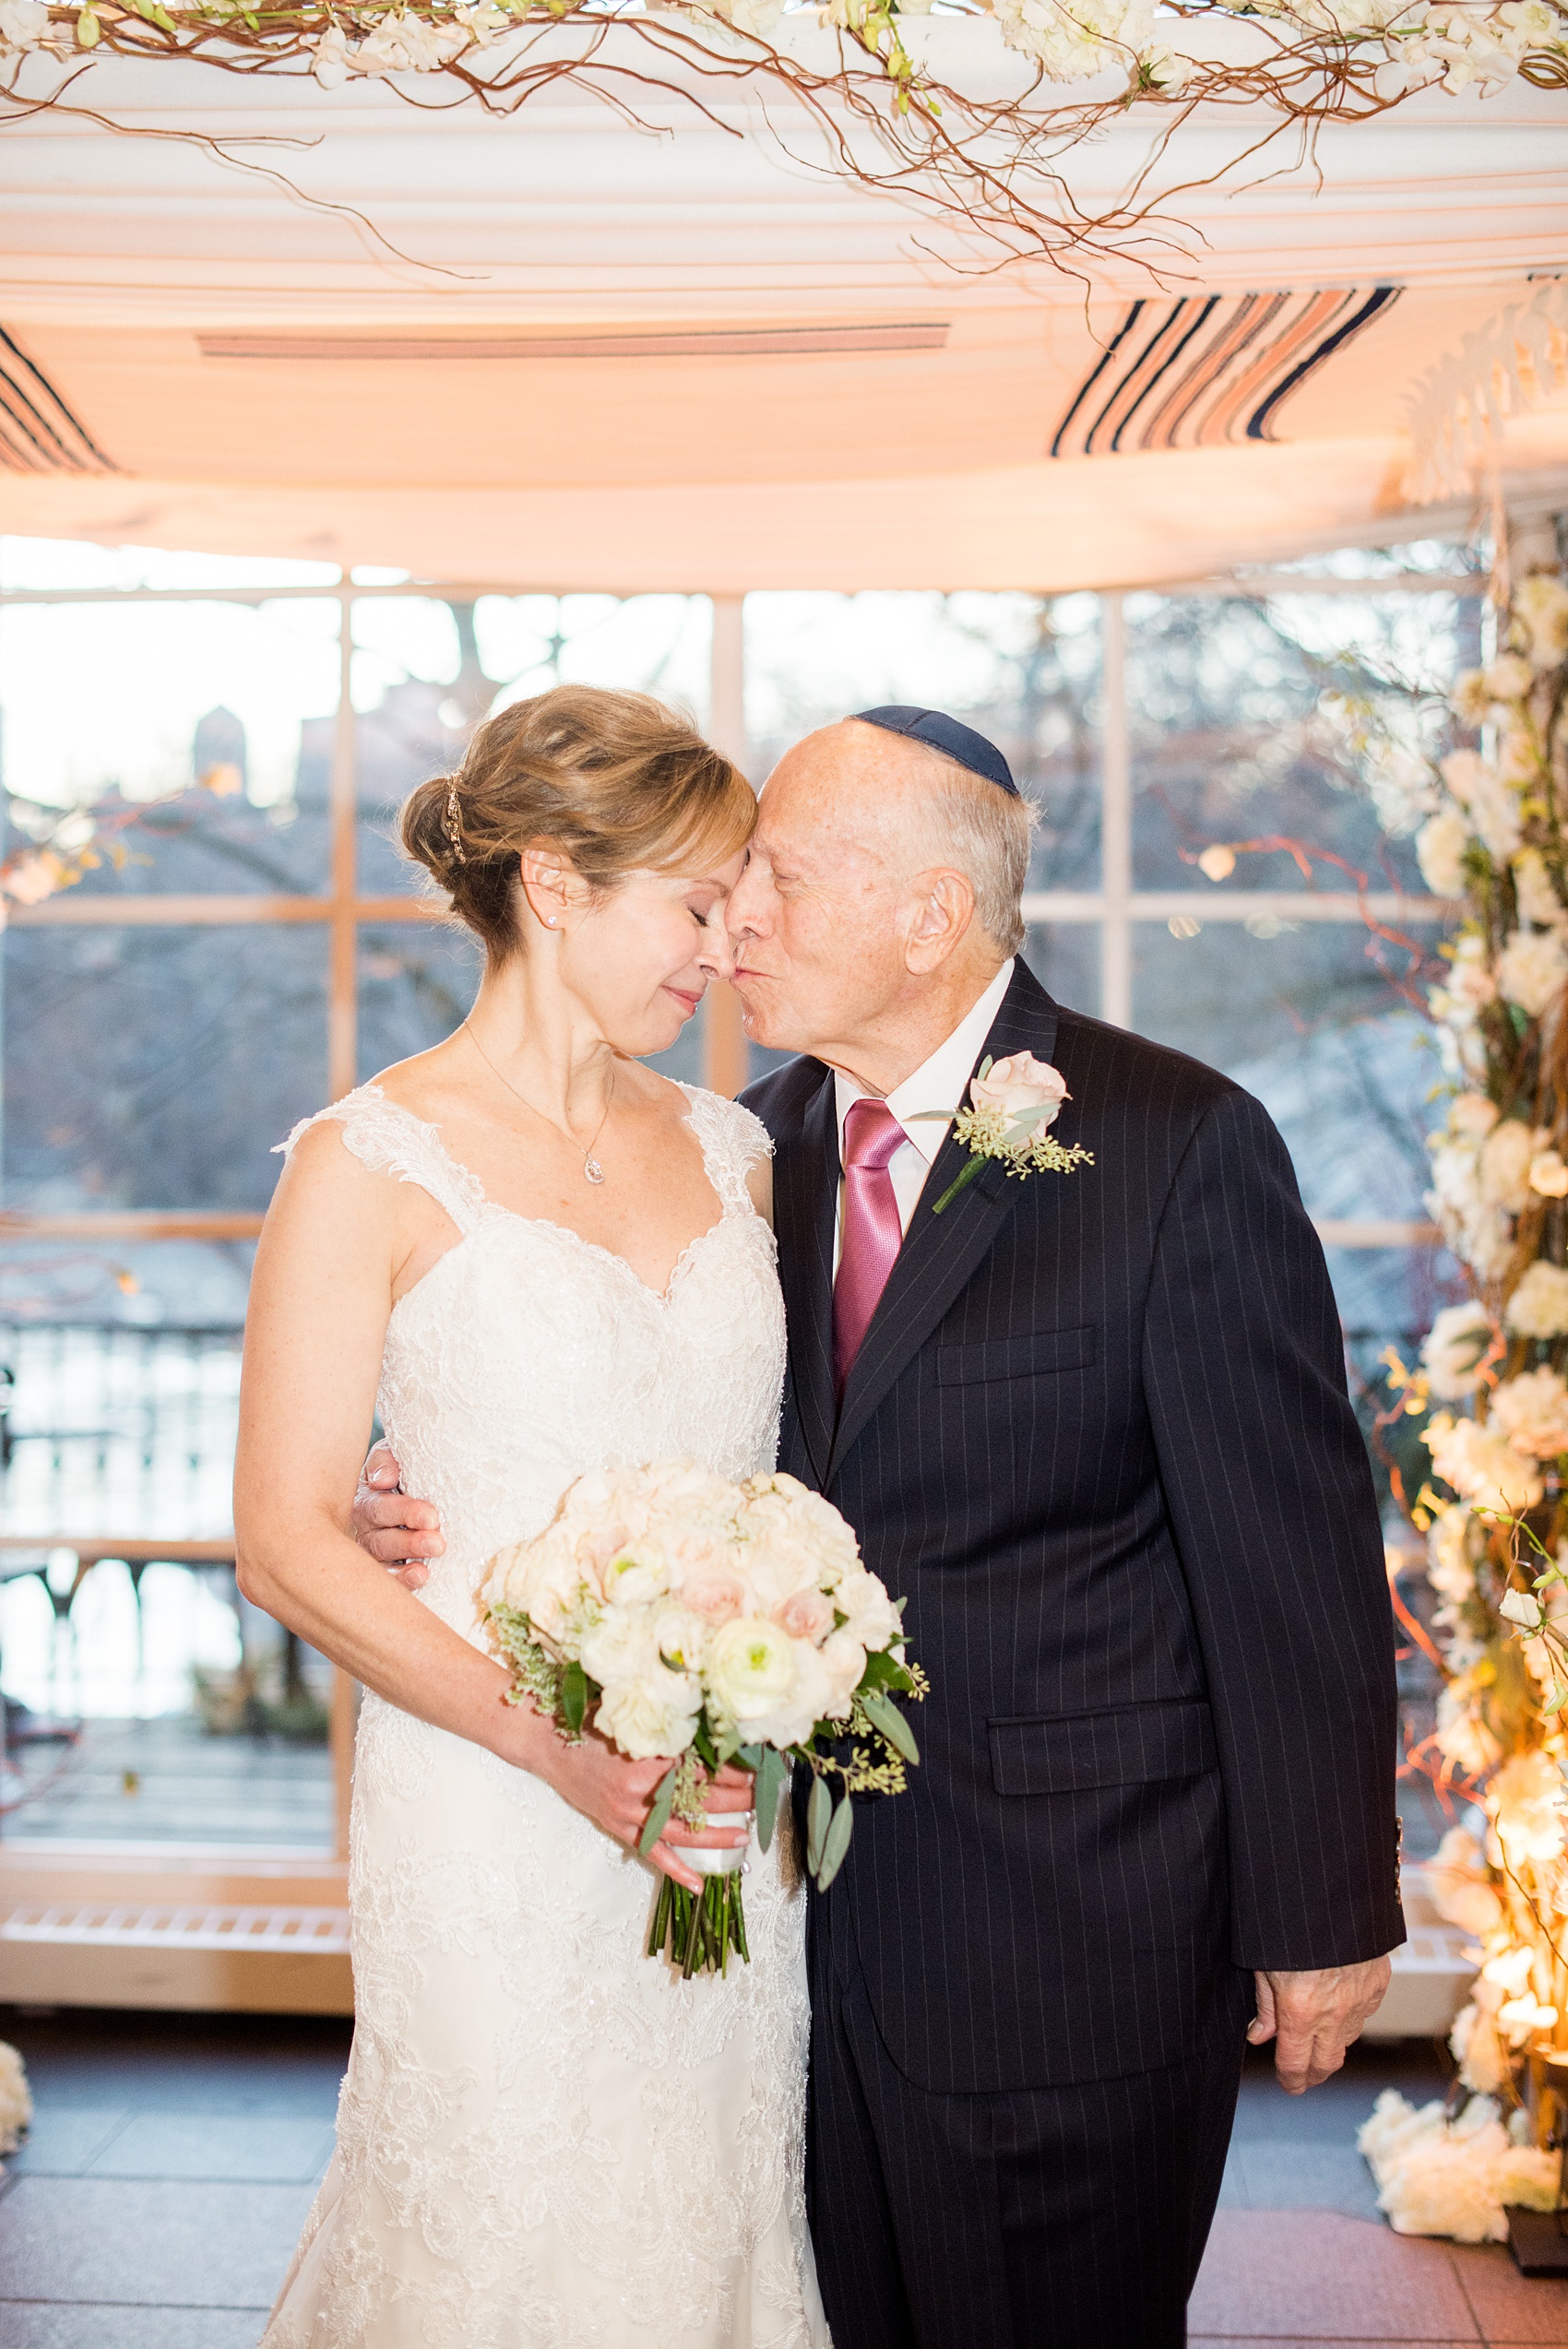 Photos by Mikkel Paige Photography of a Central Park Wedding reception at the Loeb Boathouse venue with a romantic theme. Picture of the father of the bride with his daughter under the winter inspired chuppah for their Jewish ceremony. Click through for more images from her day! #CentralParkWedding